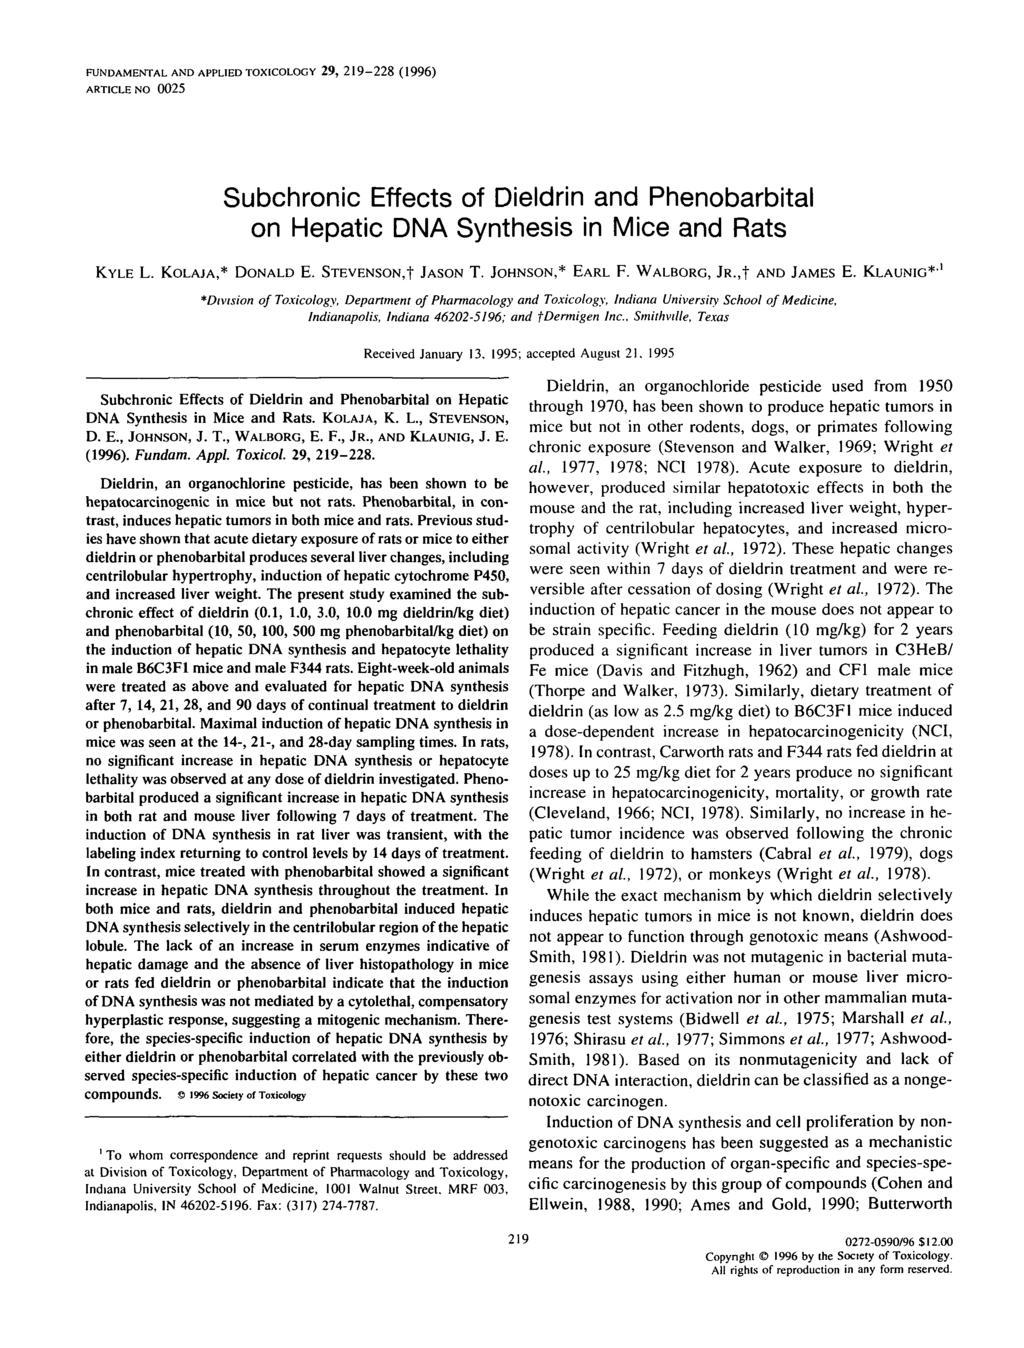 FUNDAMENTAL AND APPLIED TOXICOLOGY 29, 2 1 9-2 2 8 (1996) ARTICLE NO 00 Subhroni Effets of Dieldrin and Phenobarbital on Hepati DNA Synthesis in Mie and KYLE L. KOLAJA,* DONALD E. STEVENSON,! JASON T.